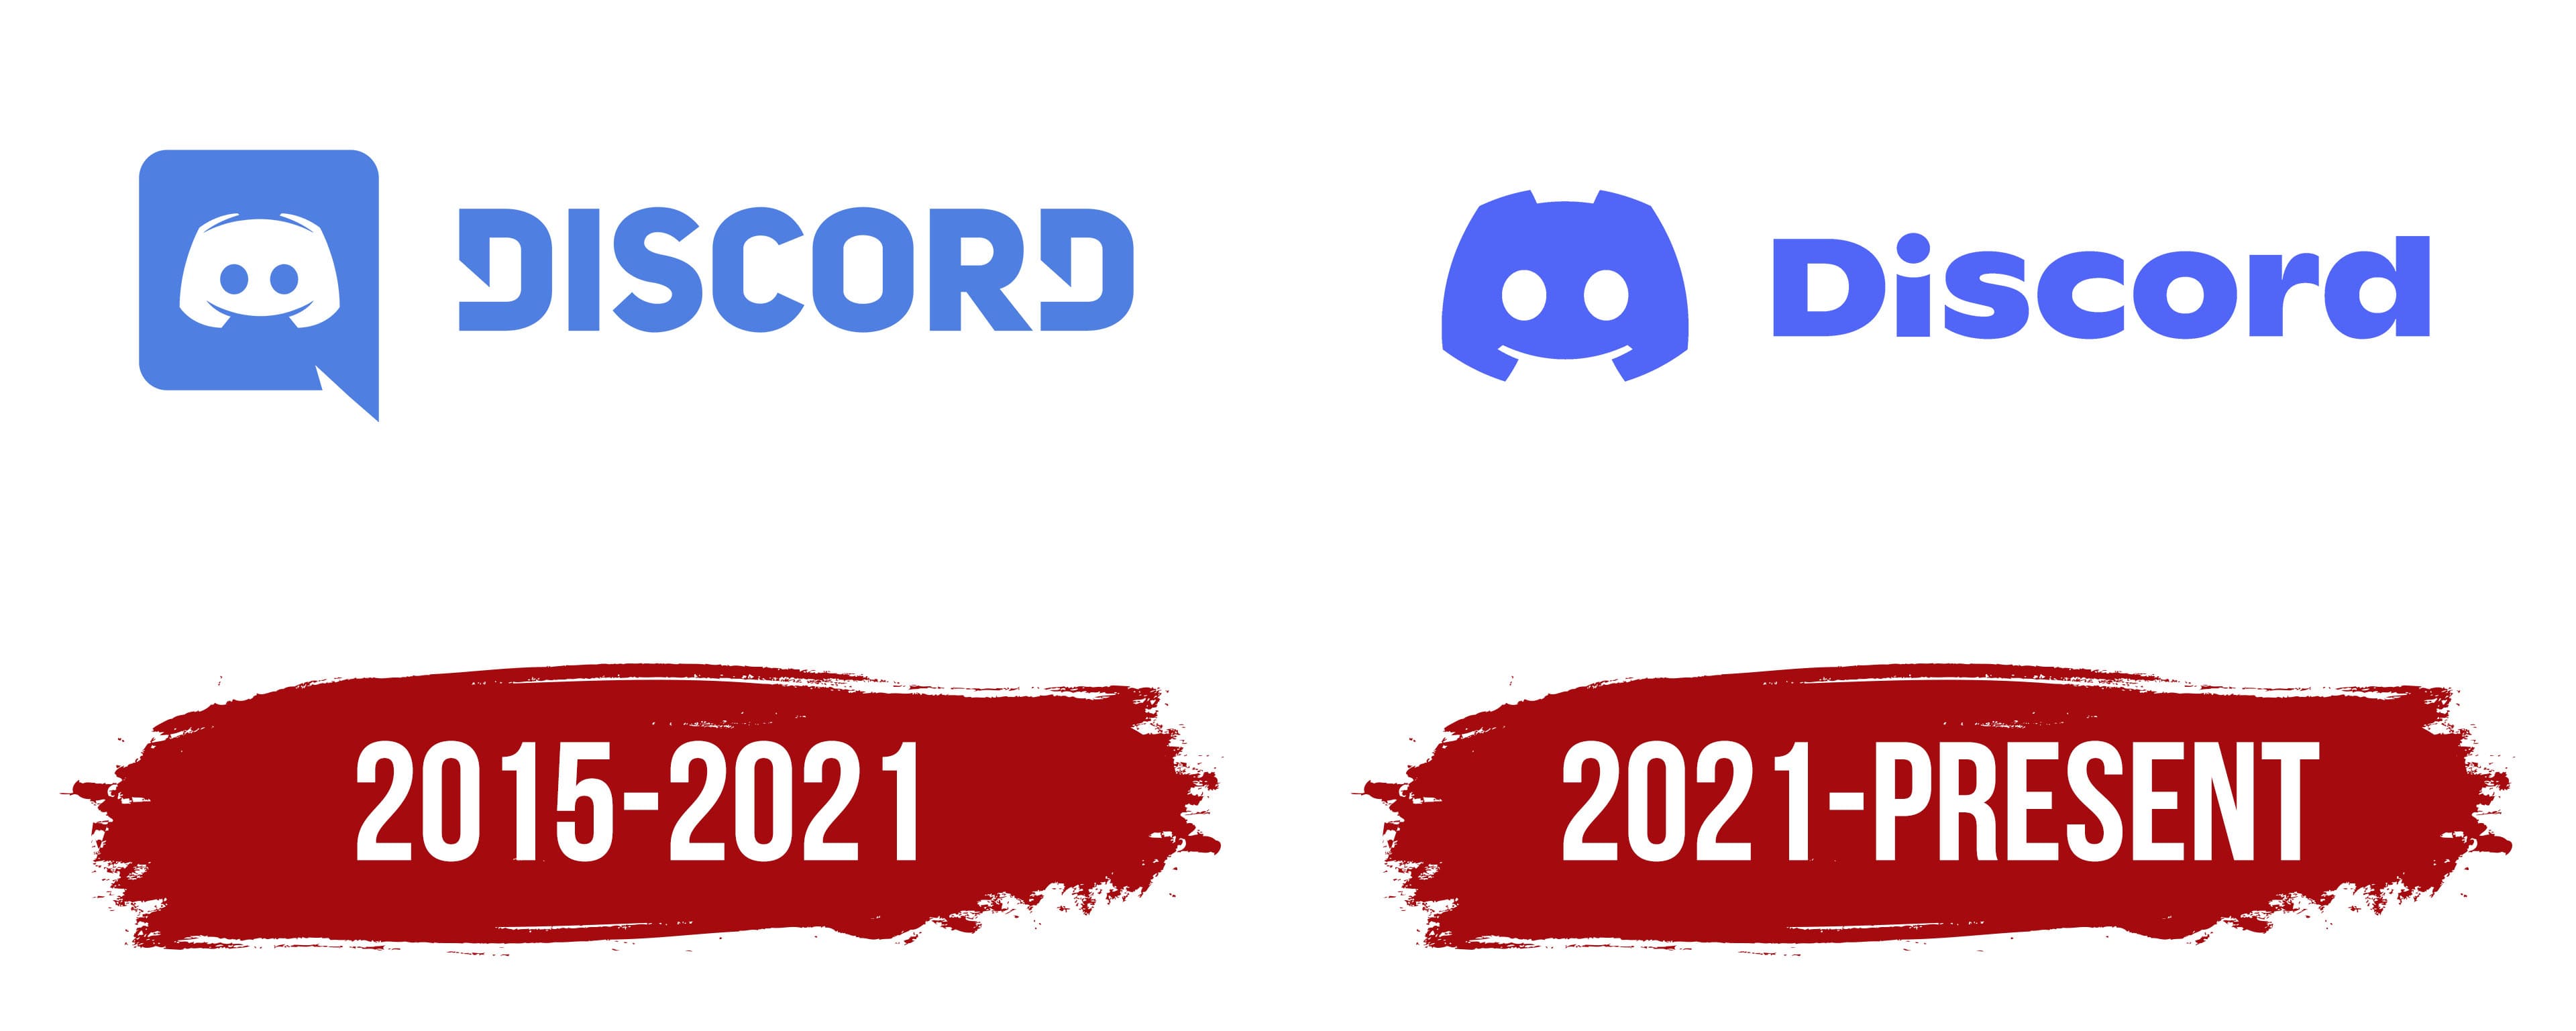 discord-logo-symbol-meaning-history-png-brand